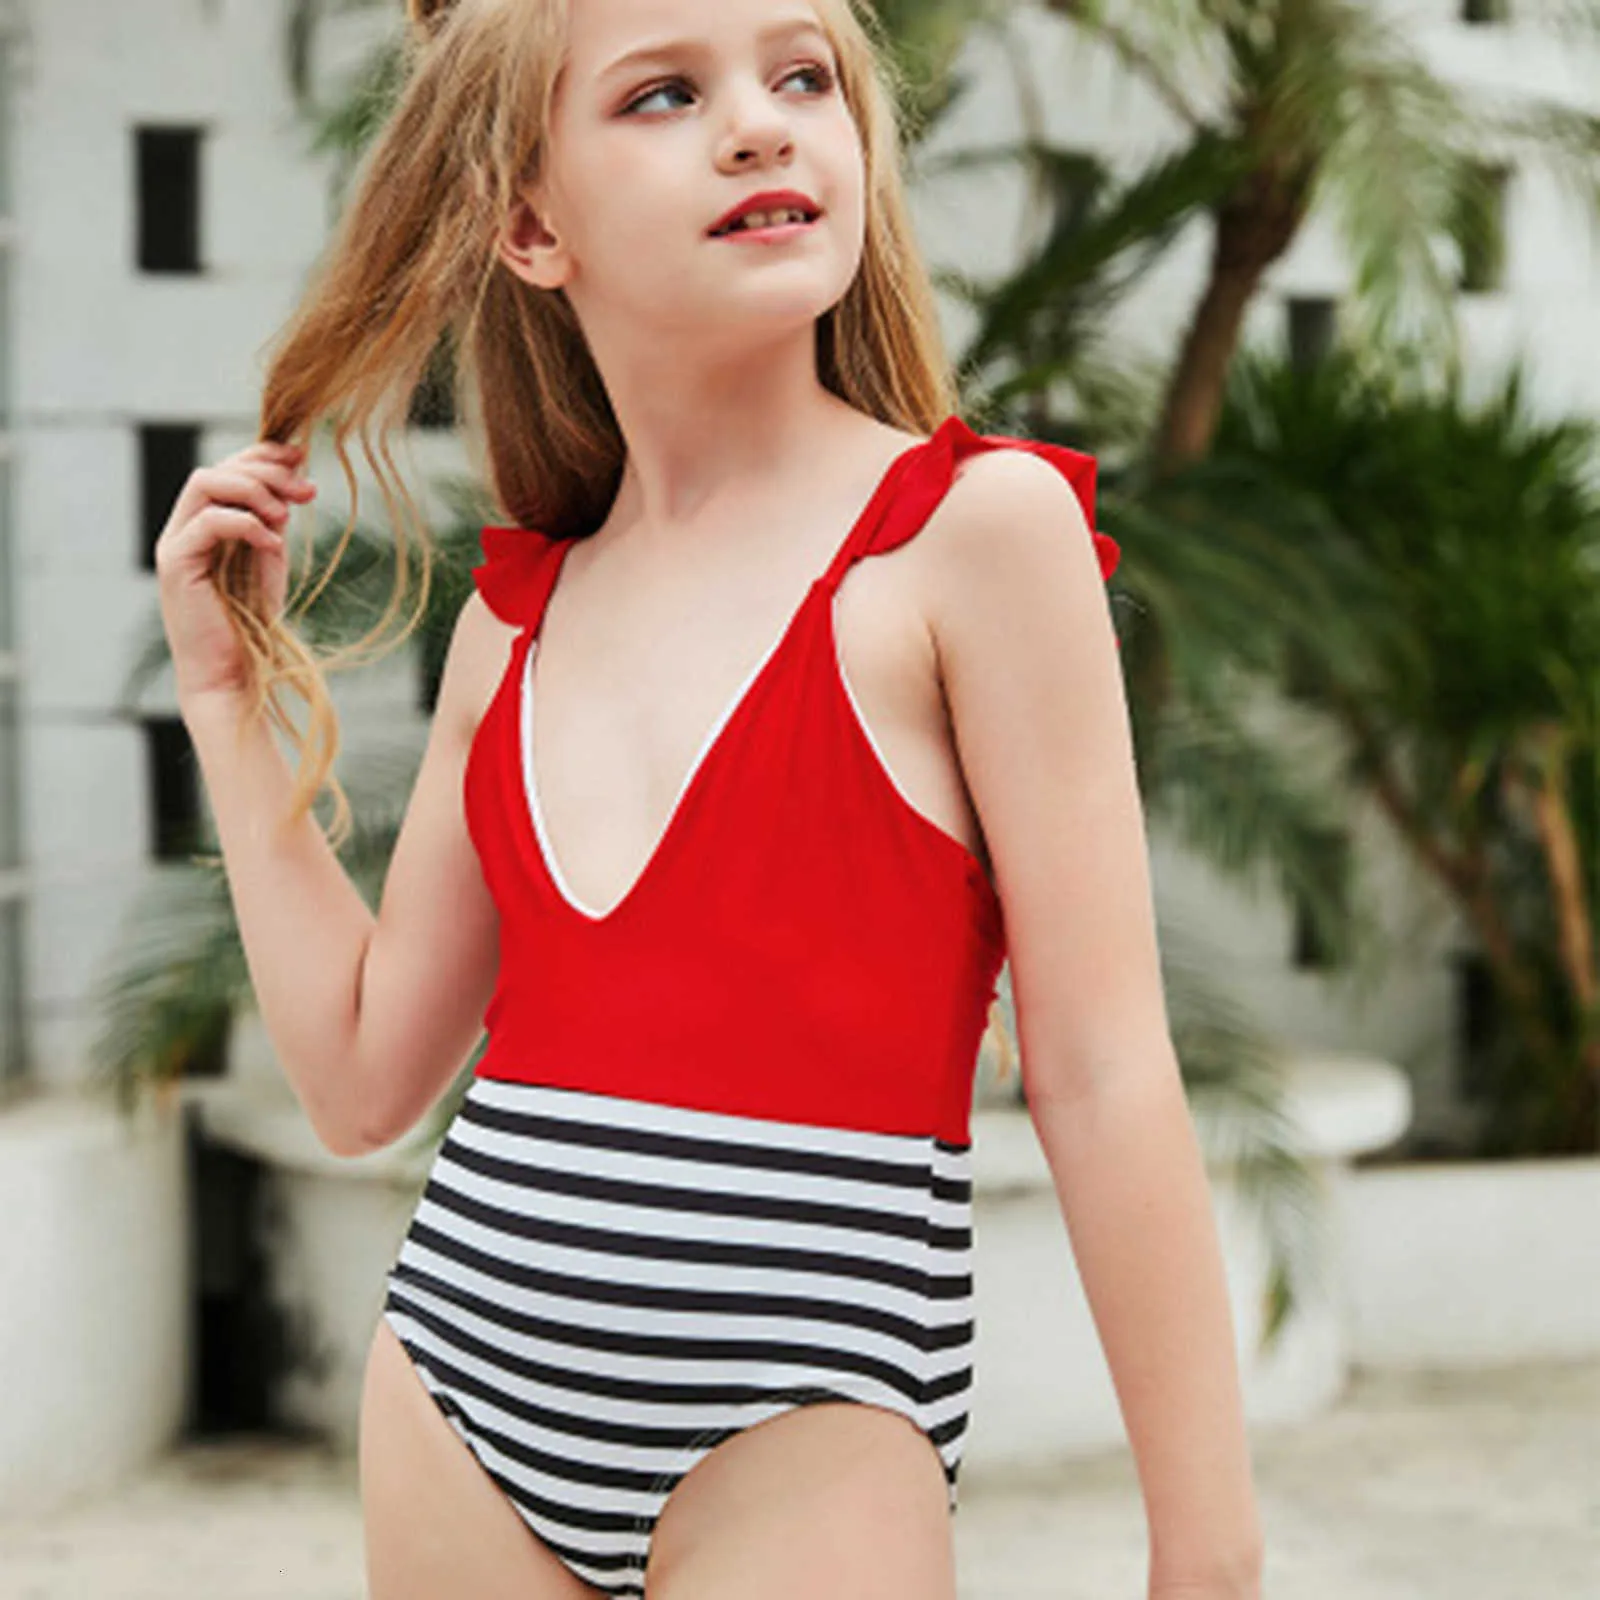 Summer Children Swimwear Vacation Leisure Stitching Color Wear Suspenders  Ruffled V Neck Red Striped Black And White Bikini Suit From 7,1 €